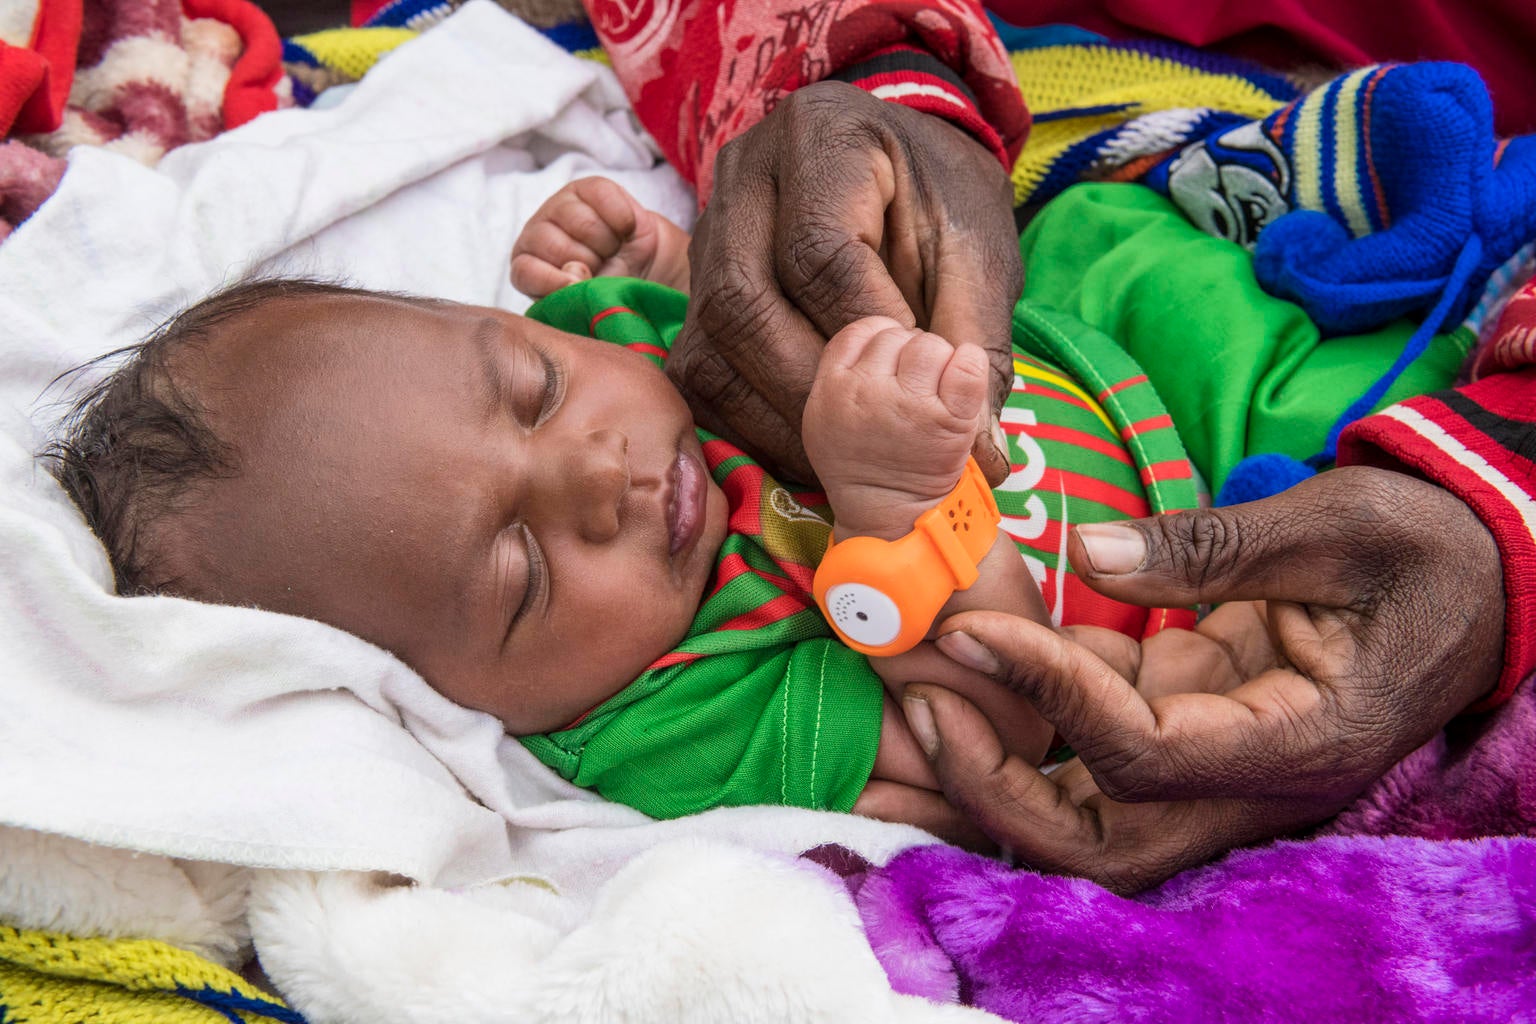 In Tambul District of the Western Highlands province, Papua New Guinea, a programme, ‘Savings Lives, Spreading Smiles’ is being delivered to help mothers protect their babies from hyperthermia